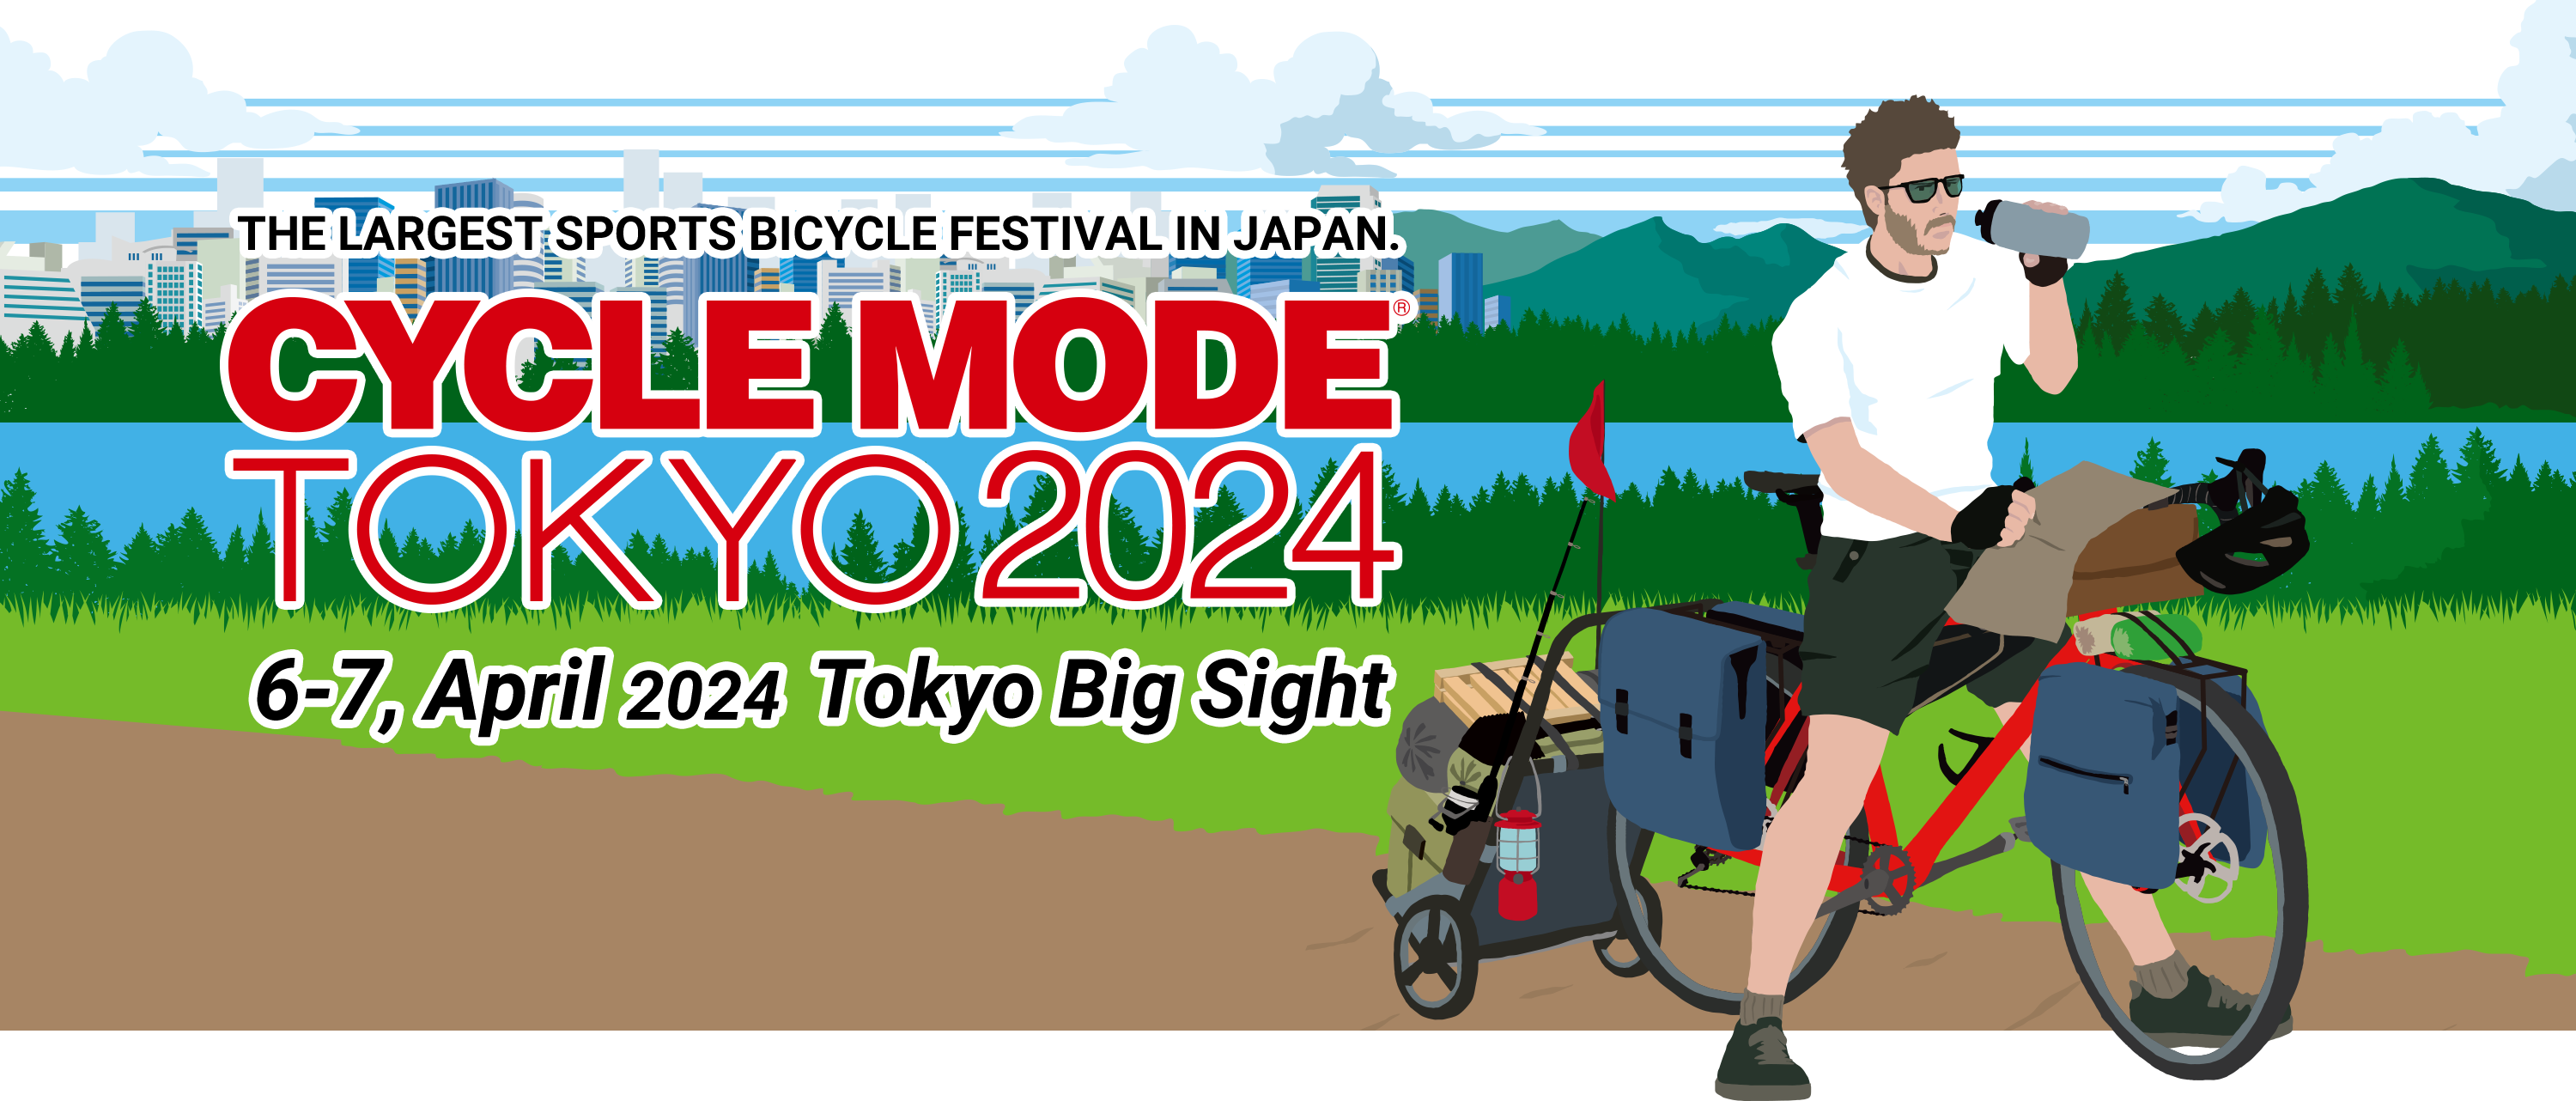 The biggest B to C cycle show in Japan Piscover Exhitement and Fun! The